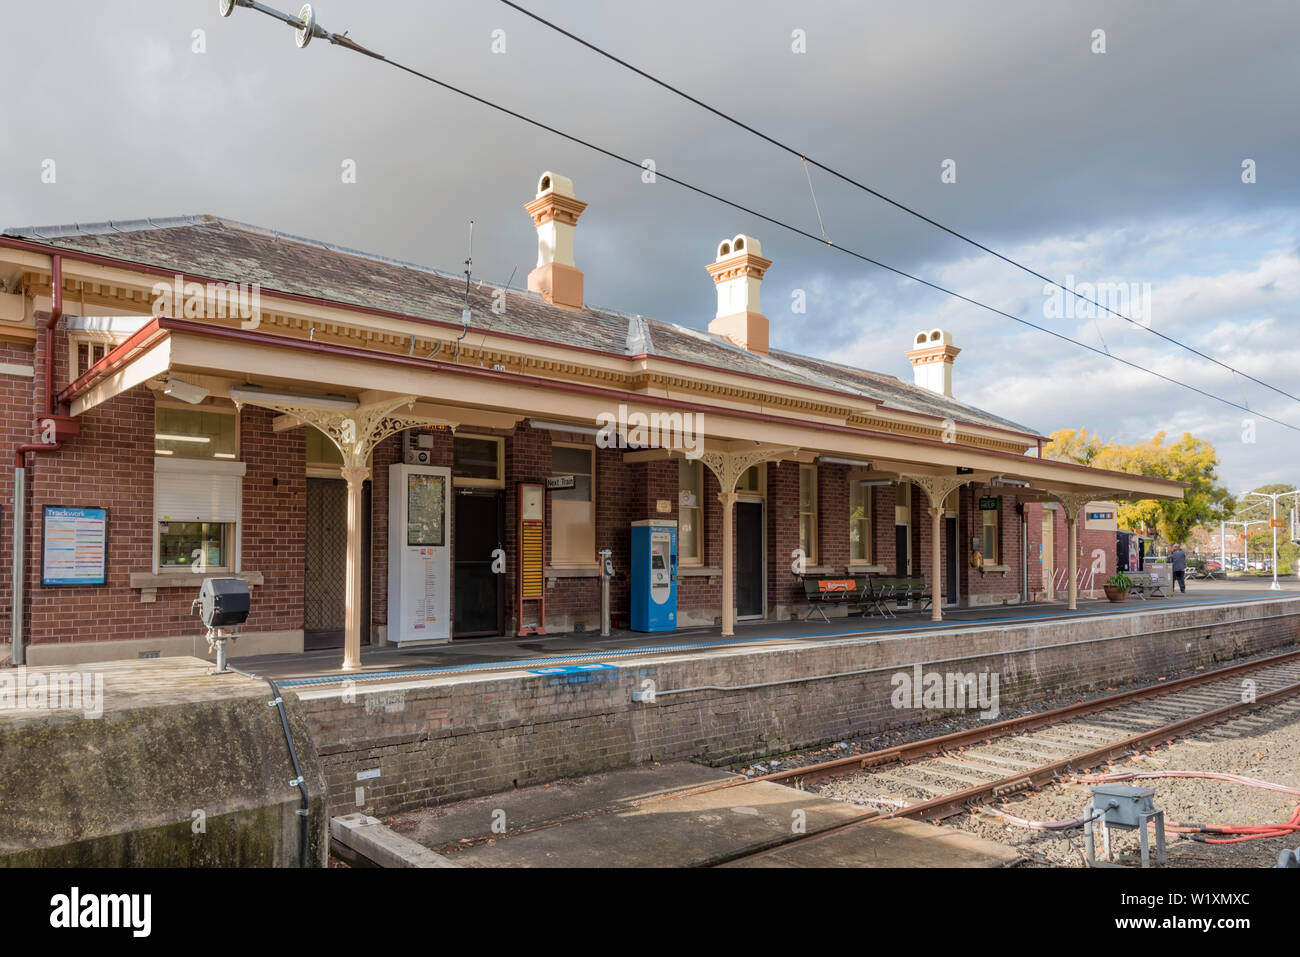 First opened in 1864, Richmond railway station is the heritage listed terminus railway station of the Richmond rail line in New South Wales Australia Stock Photo